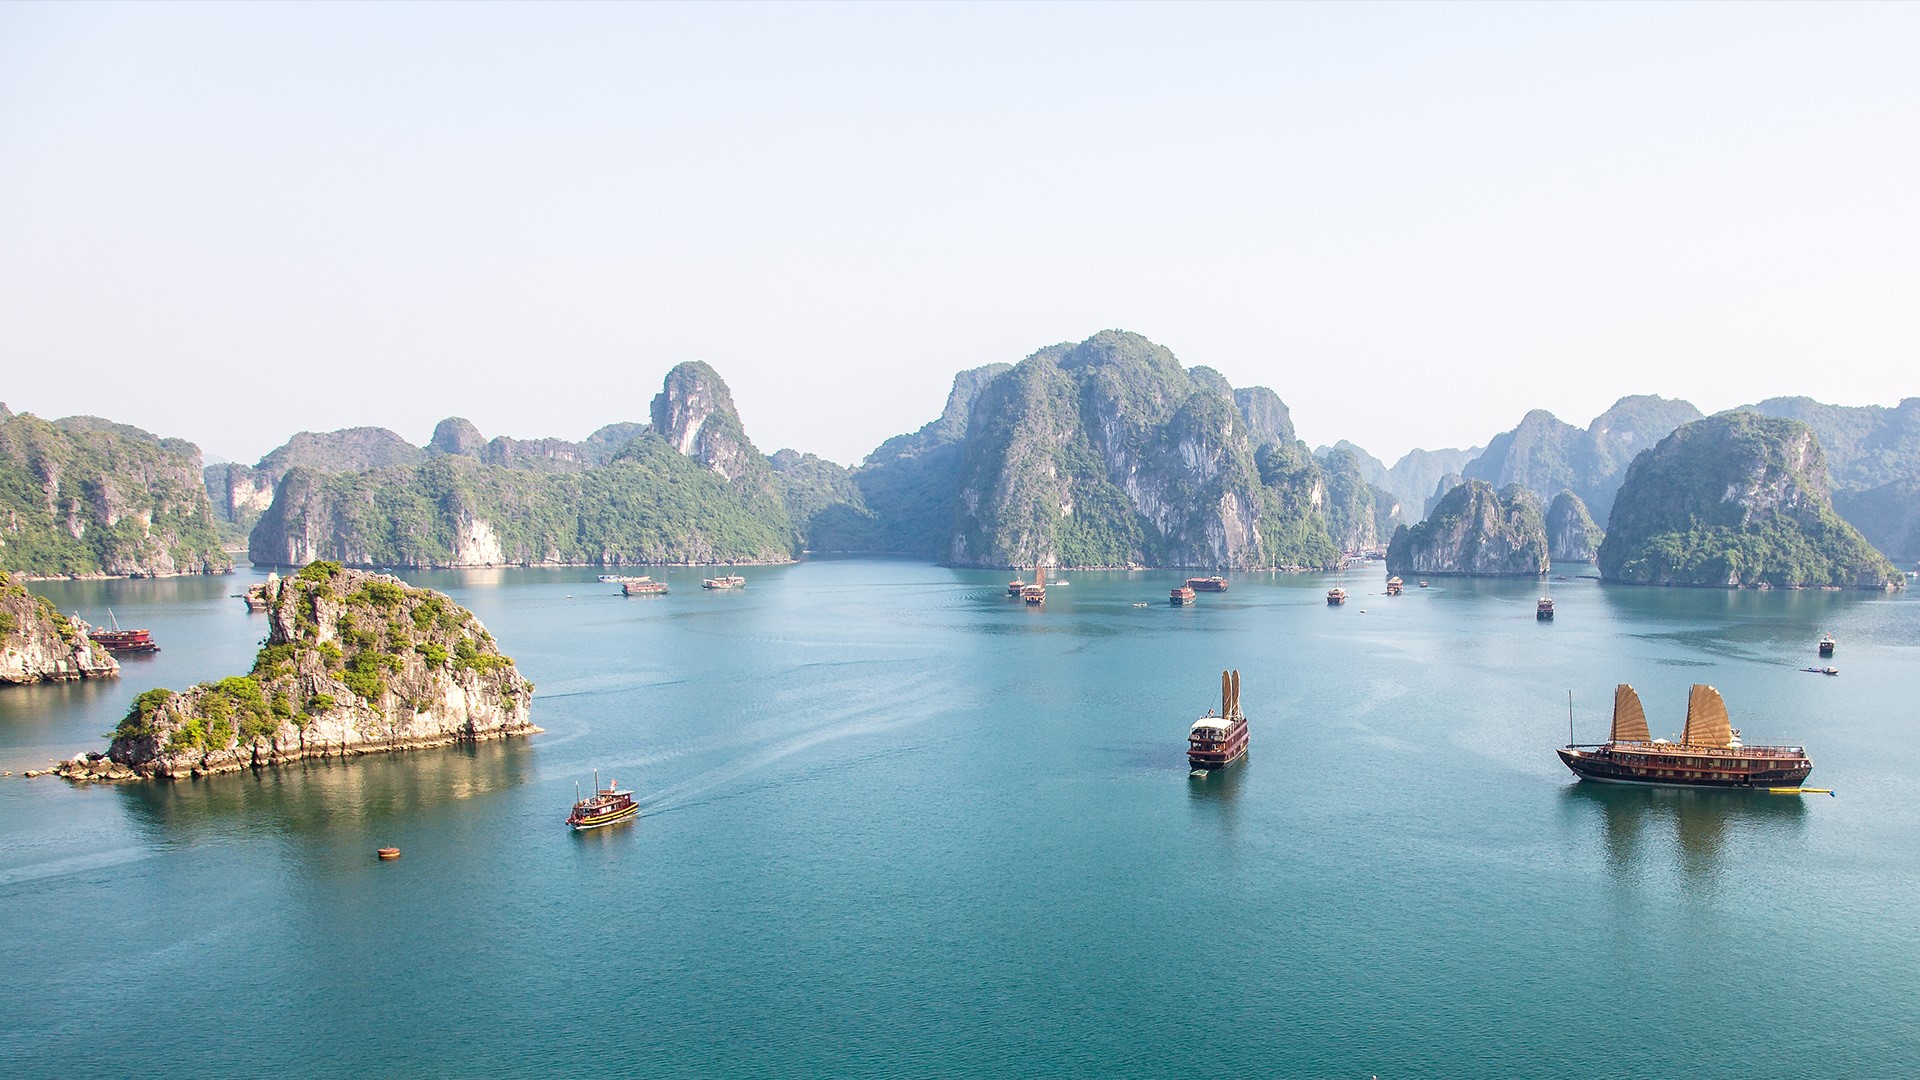 General 1920x1080 nature landscape island mountains water boat bay Halong Bay Vietnam Asia